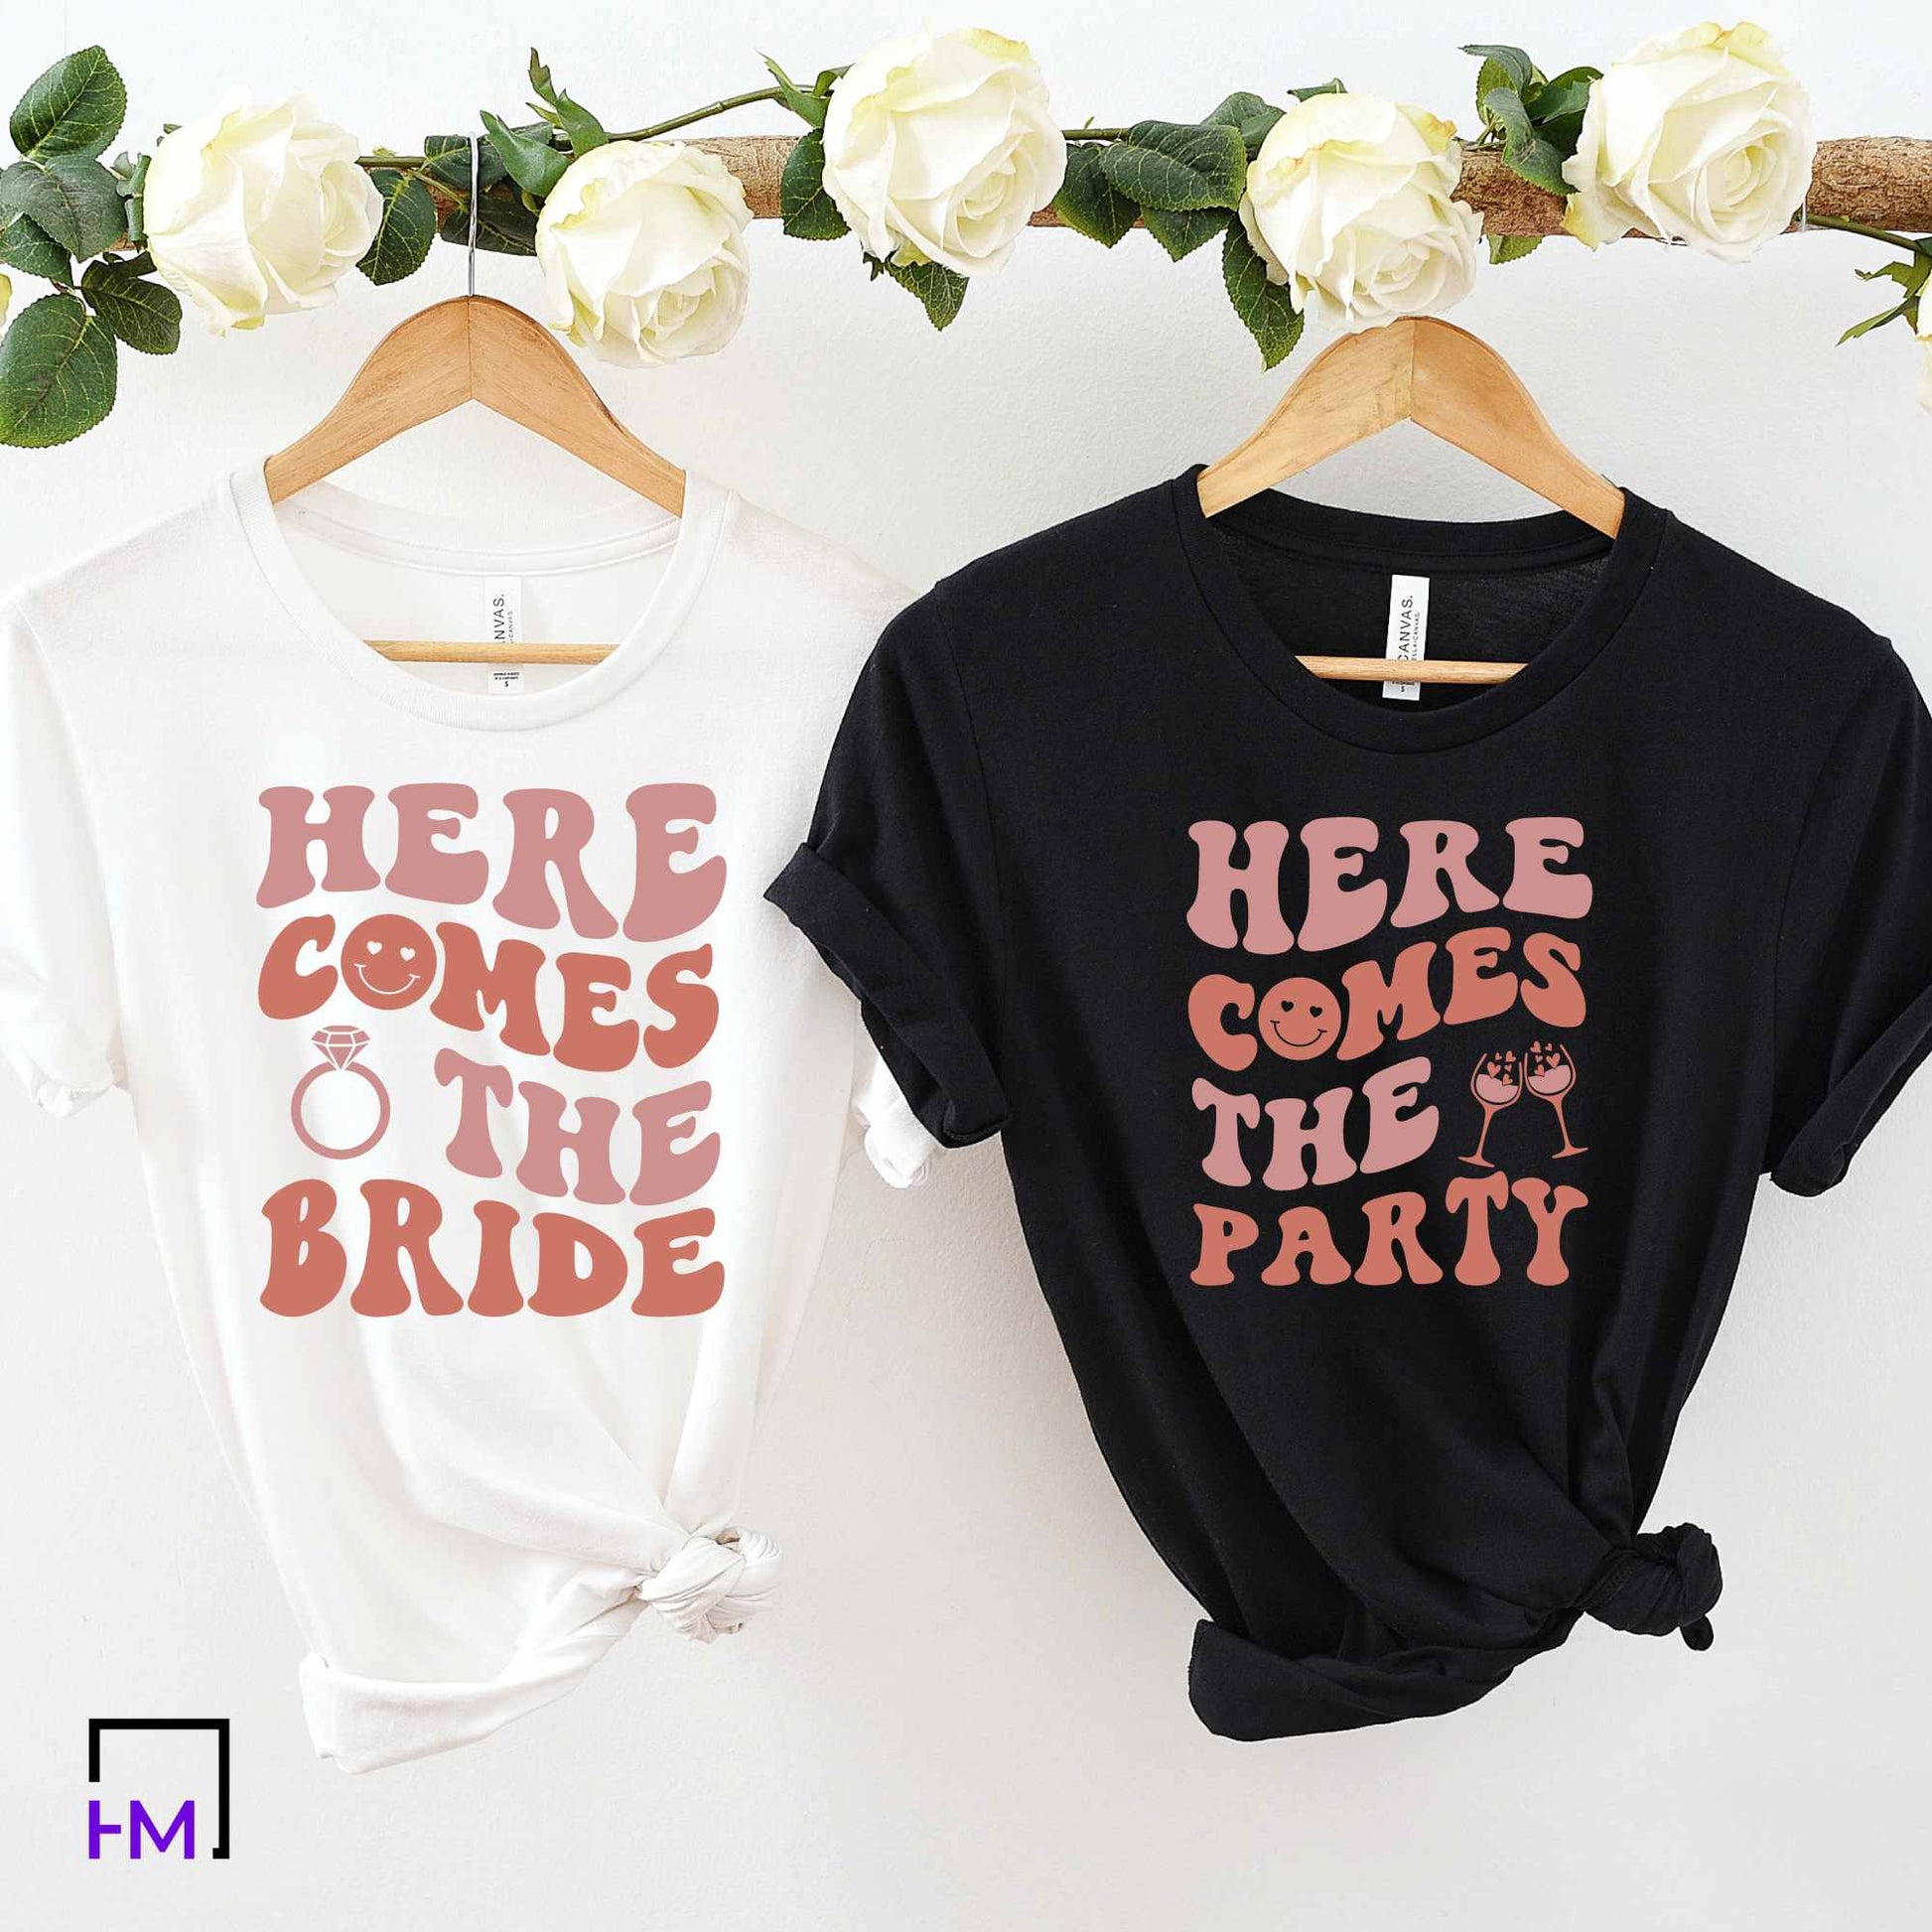 Here Comes the Bride, Here Comes the Party Shirts, Funny Bachelorette Party Shirts HMDesignStudioUS